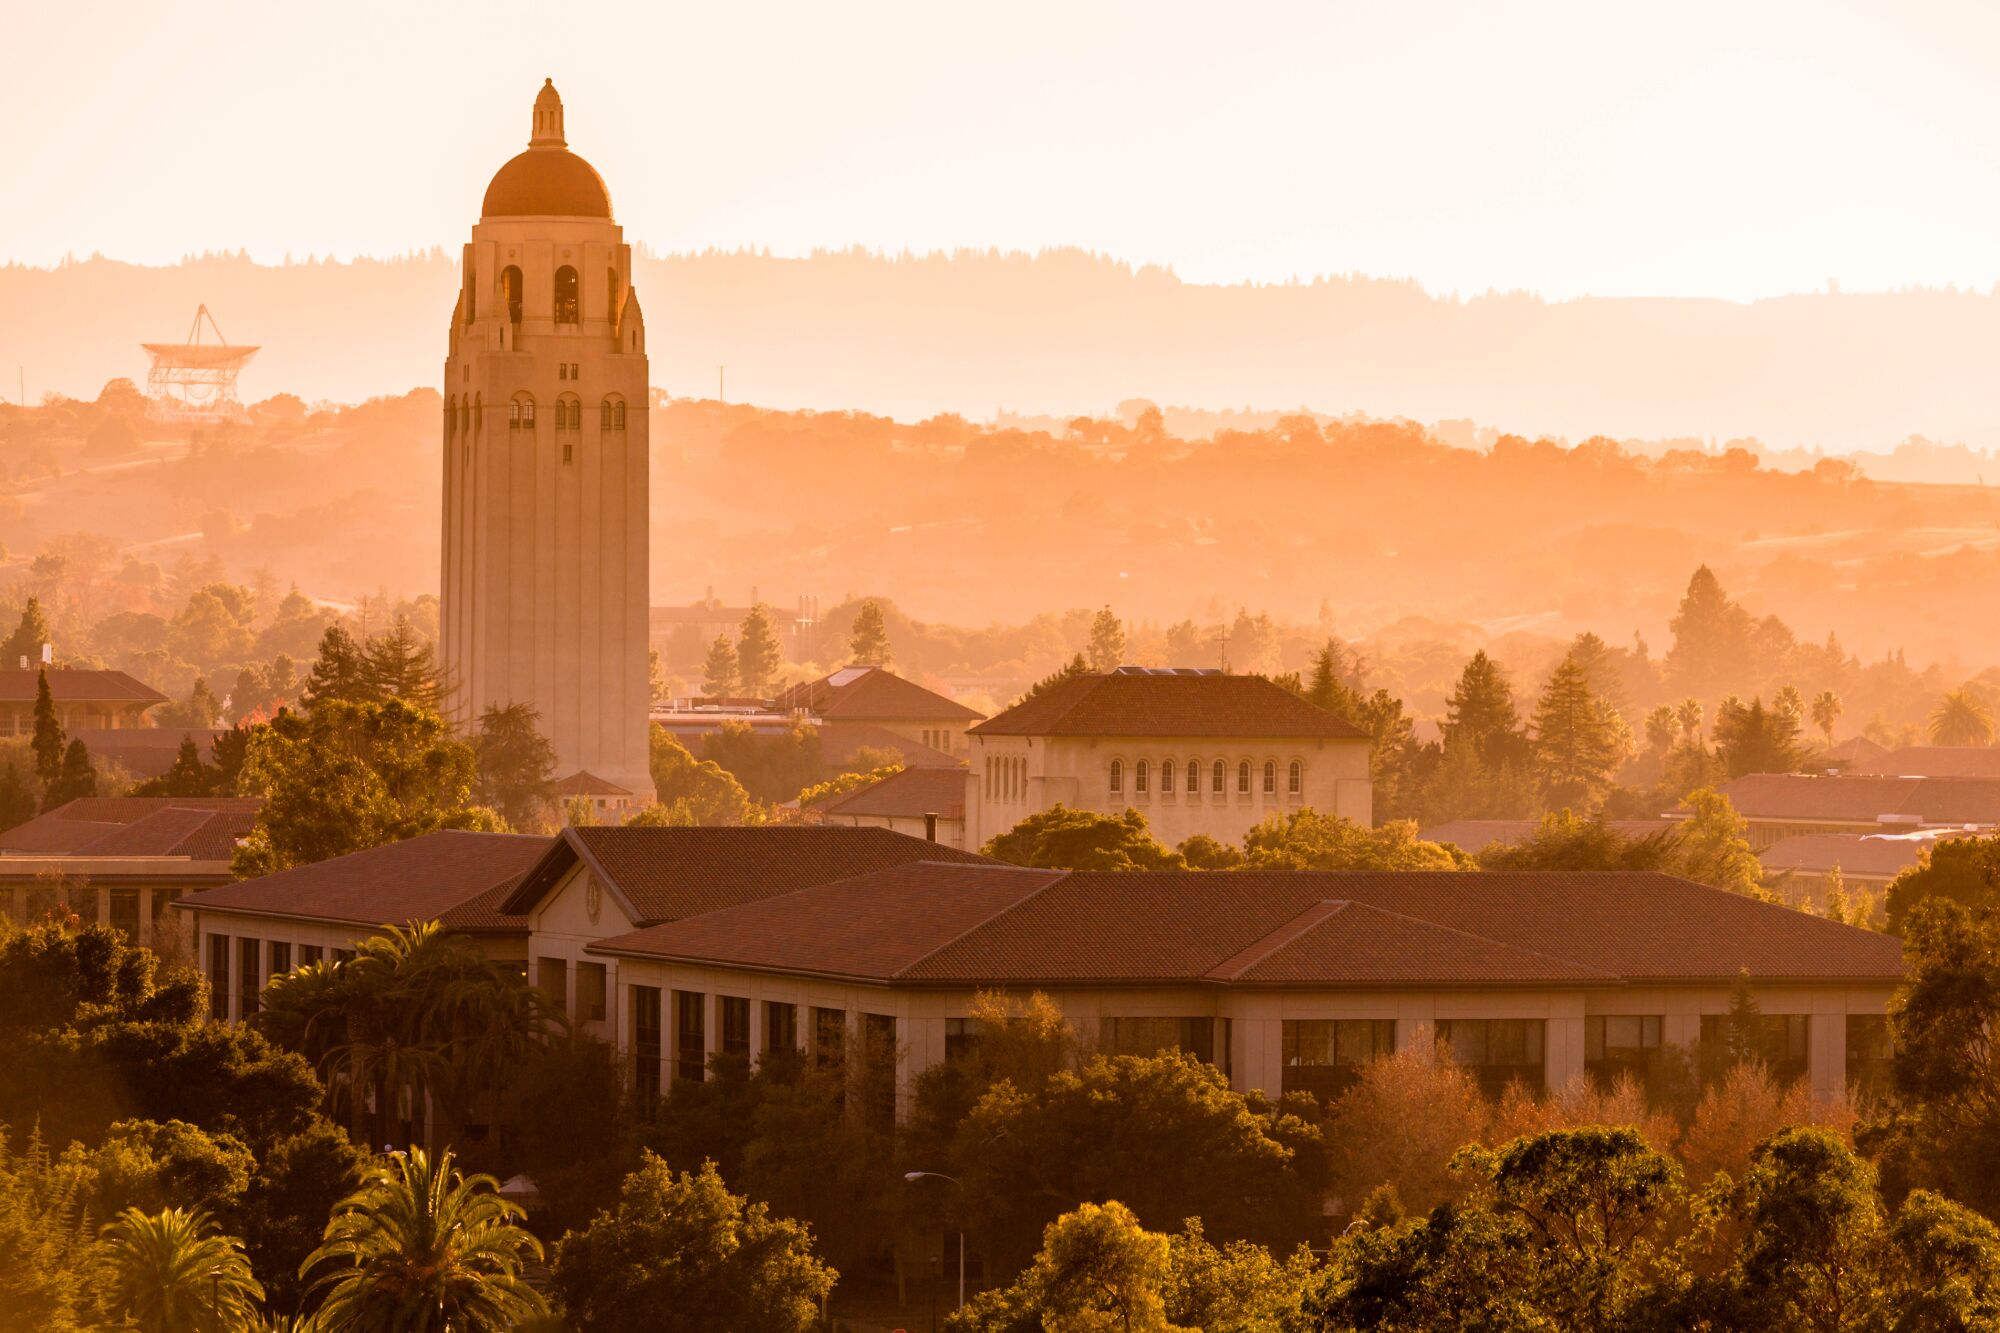 A sepia-tone photo of Stanford University campus, showing the conservative Hoover Institution tower and the radar dish built by the United States Air Force